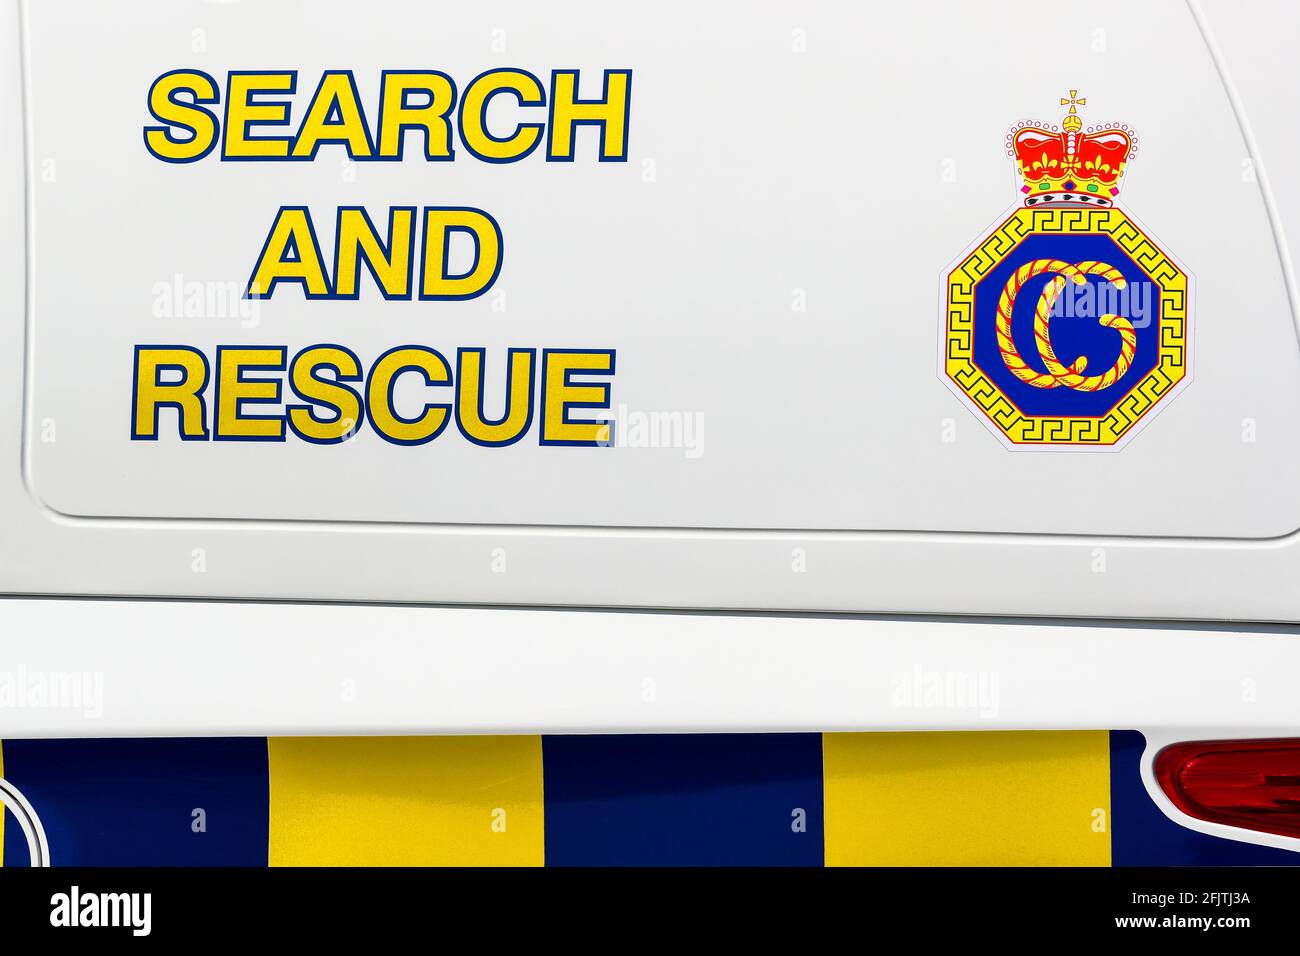 Government logo on the side of a search and rescue coastguard vehicle with reflective pattern, Scotland. Stock Photo